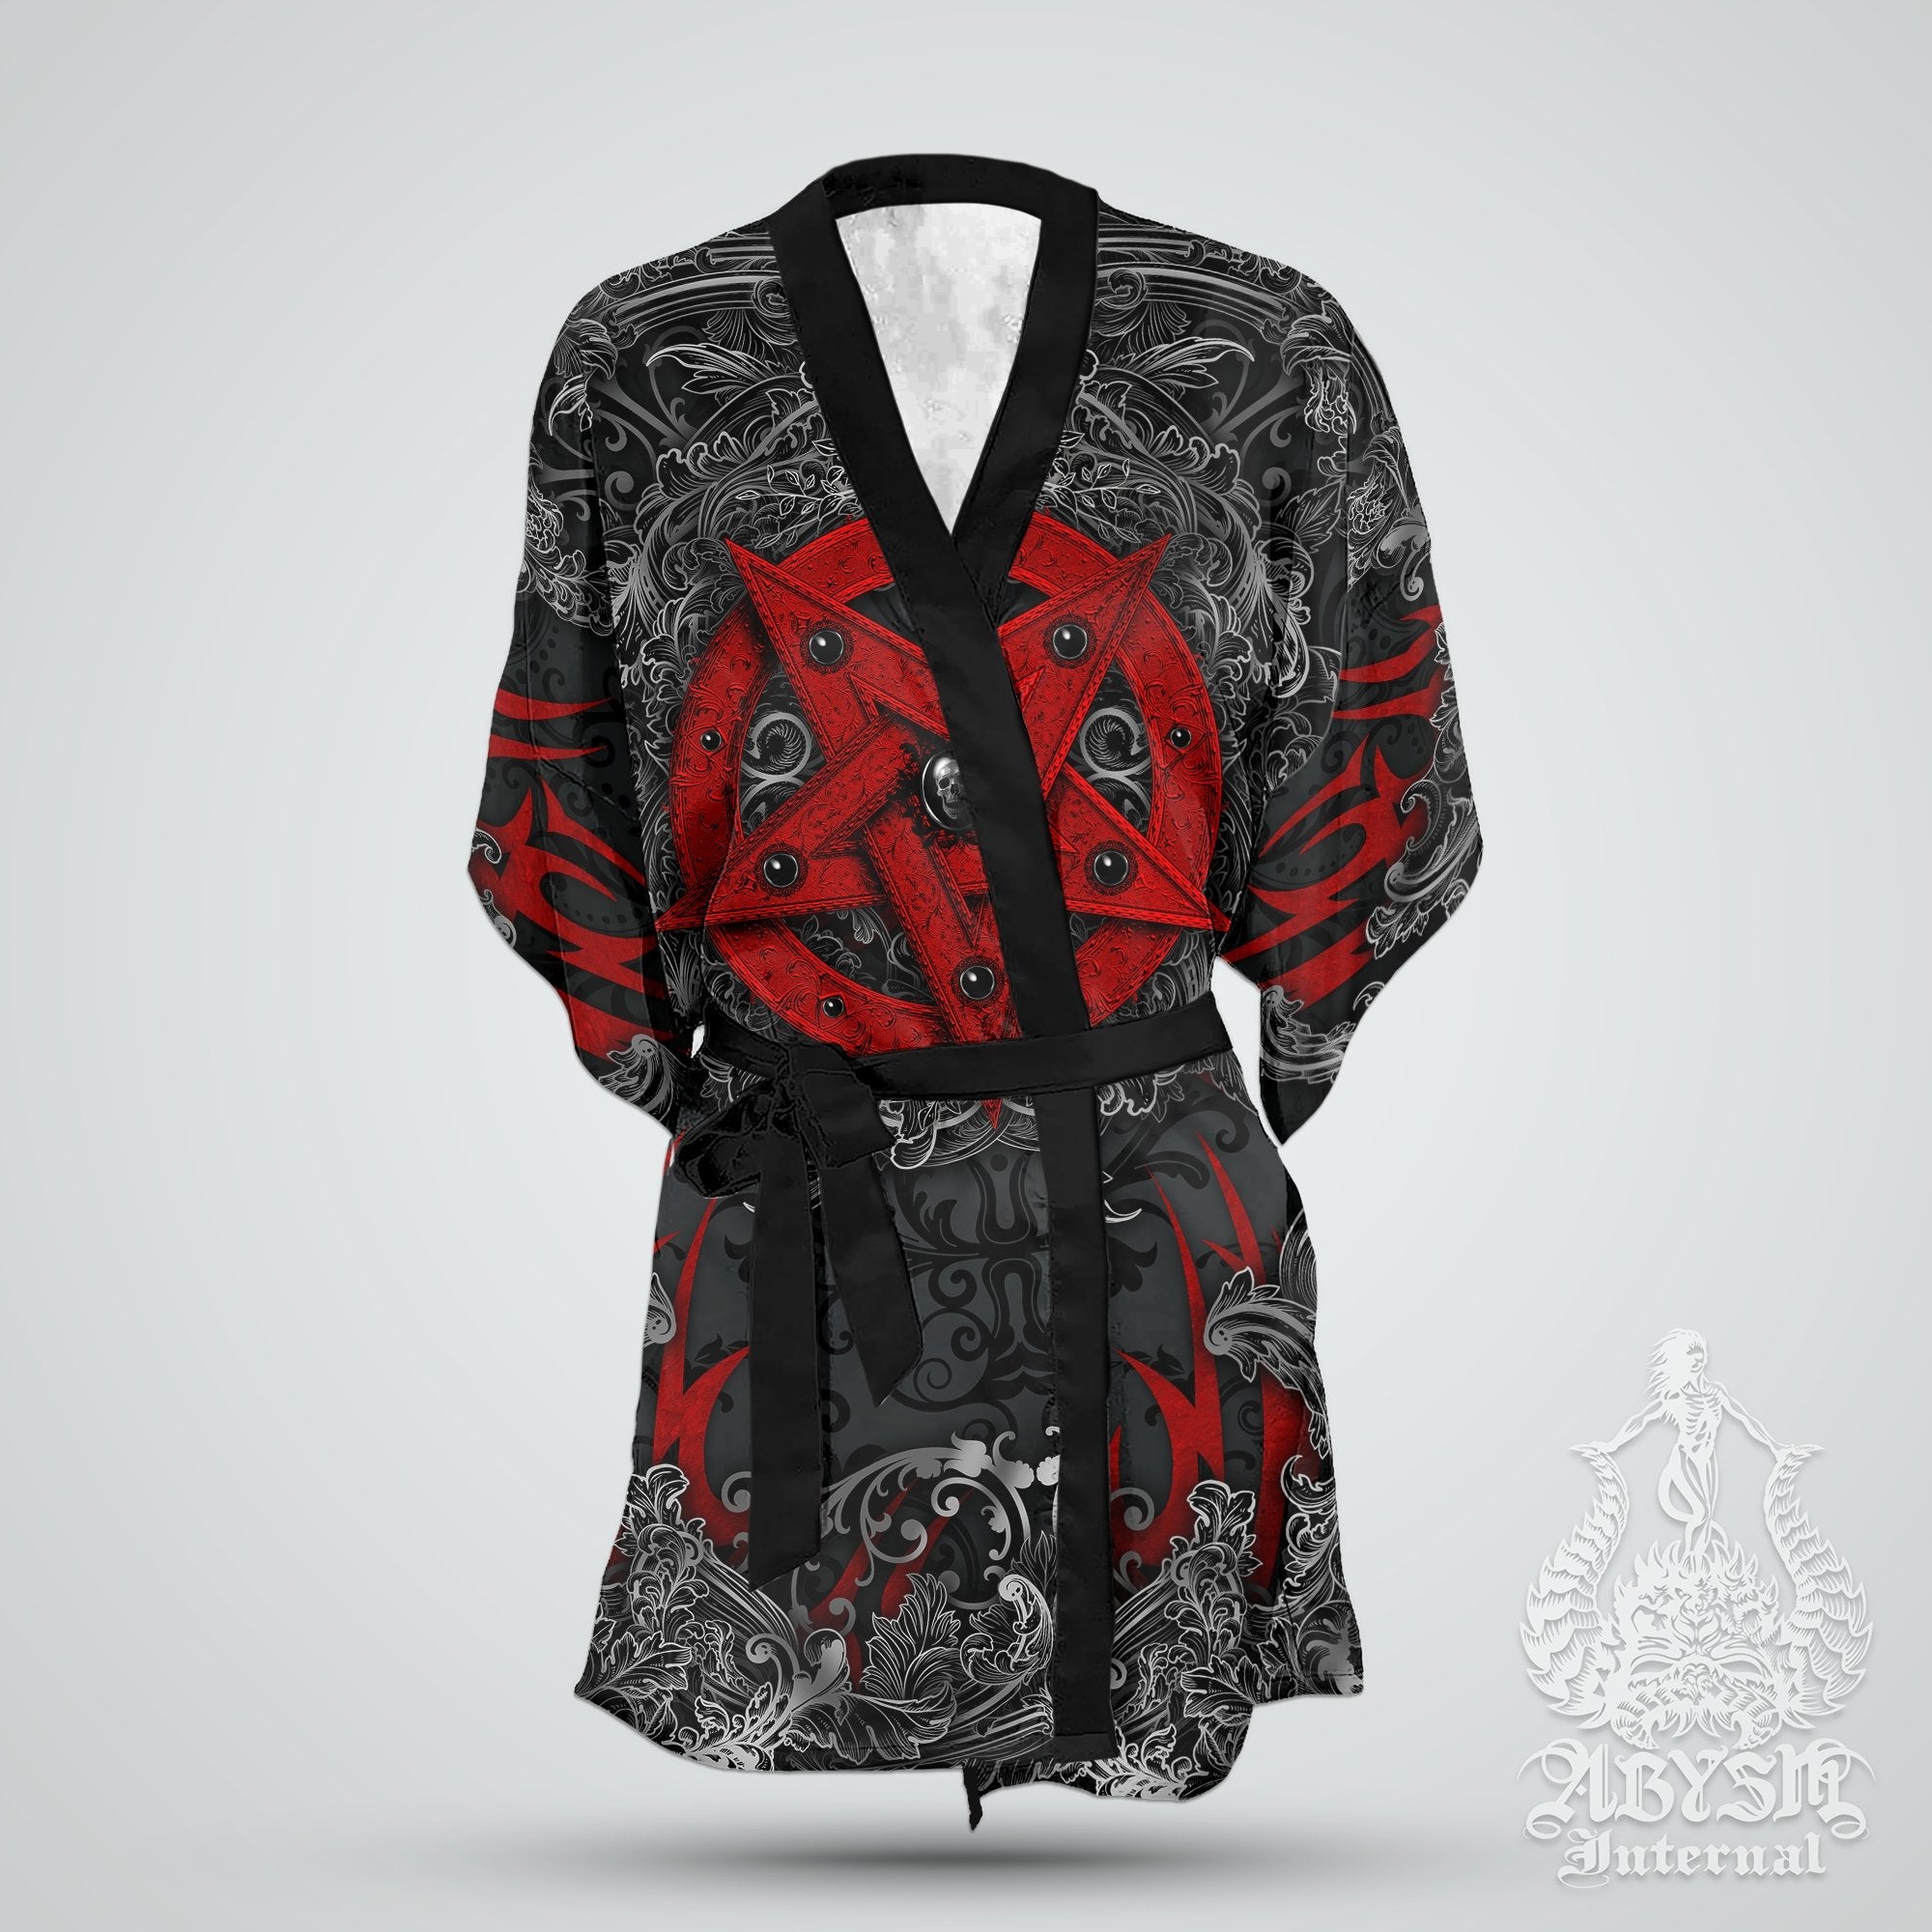 Pentagram Cover Up, Beach Outfit, Party Kimono, Metal Summer Festival Robe, Satanic Gothic Indie and Alternative Clothing, Unisex - Red Black - Abysm Internal